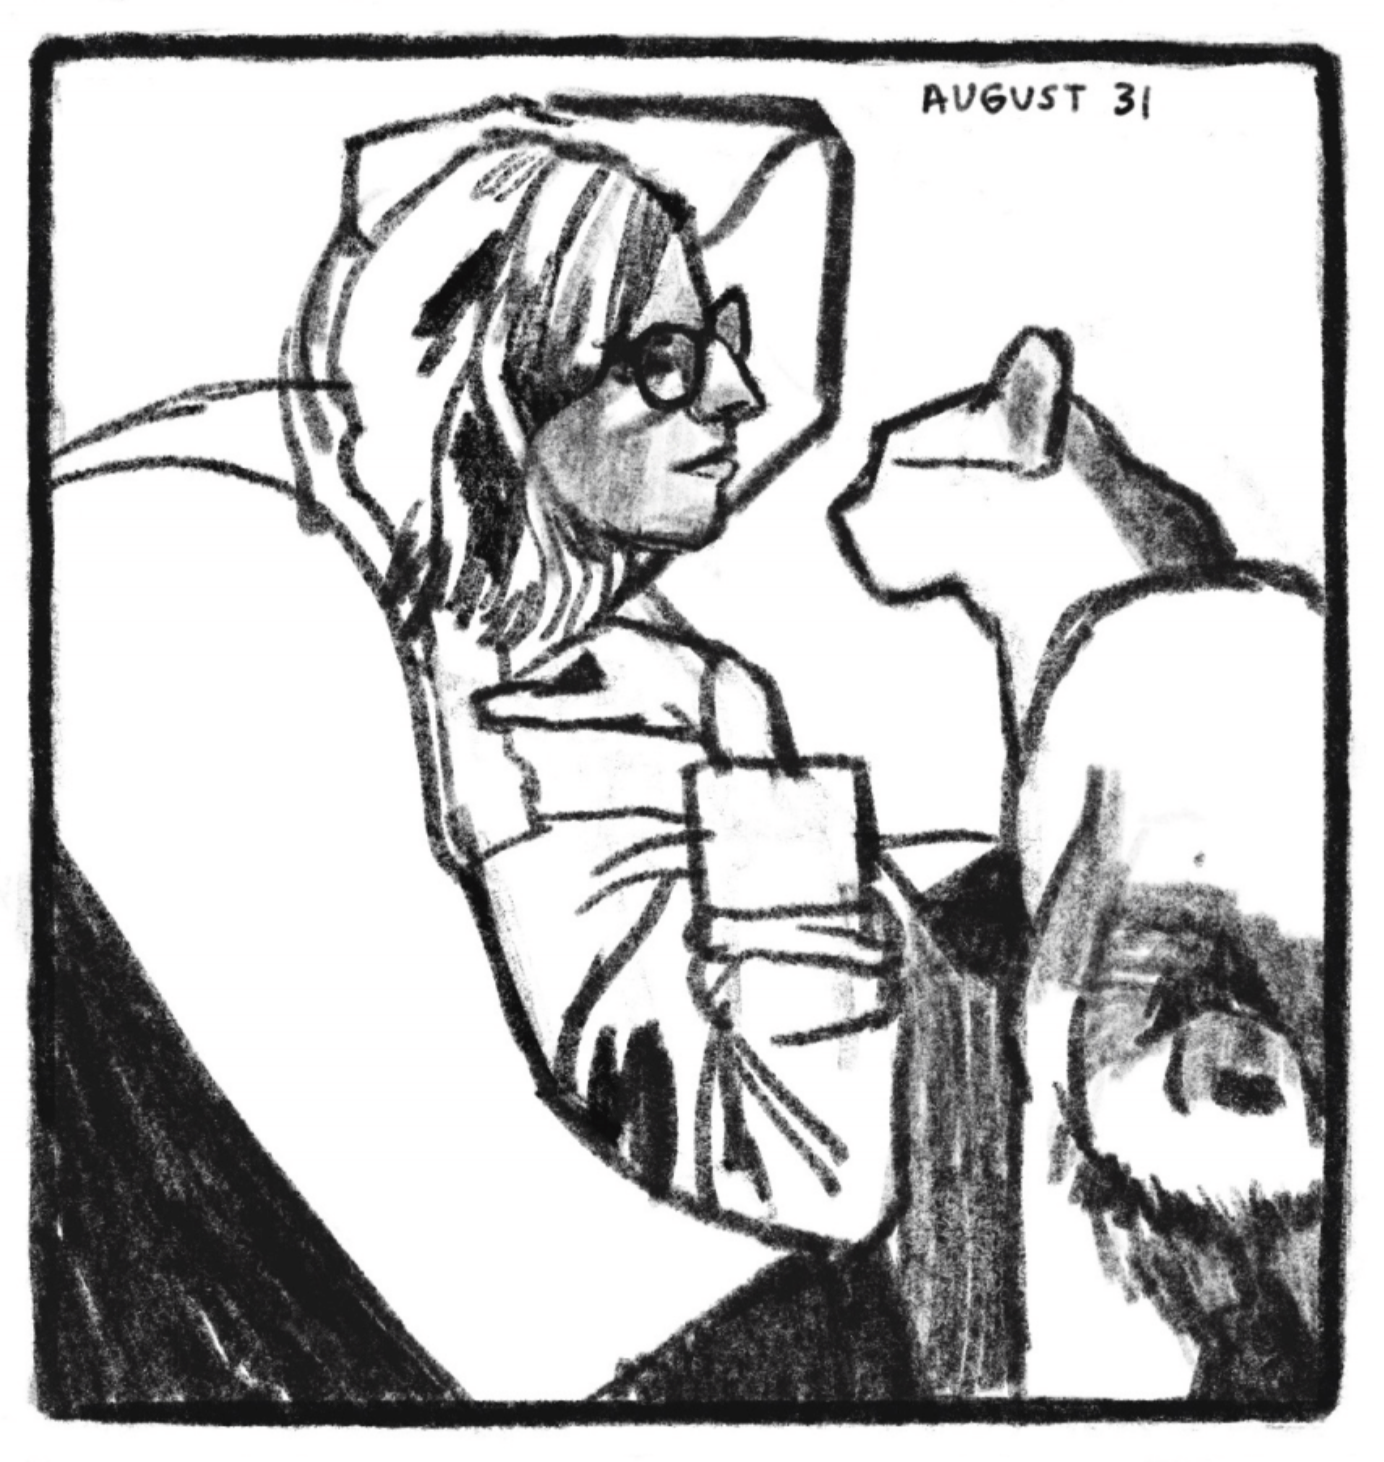 Kim is sitting in an armchair, looking lovingly at Tonks, whose face is just inches away from hers. This panel is more sparingly shaded than most in the collection, with a lot of  white space. â€œAugust 31.â€